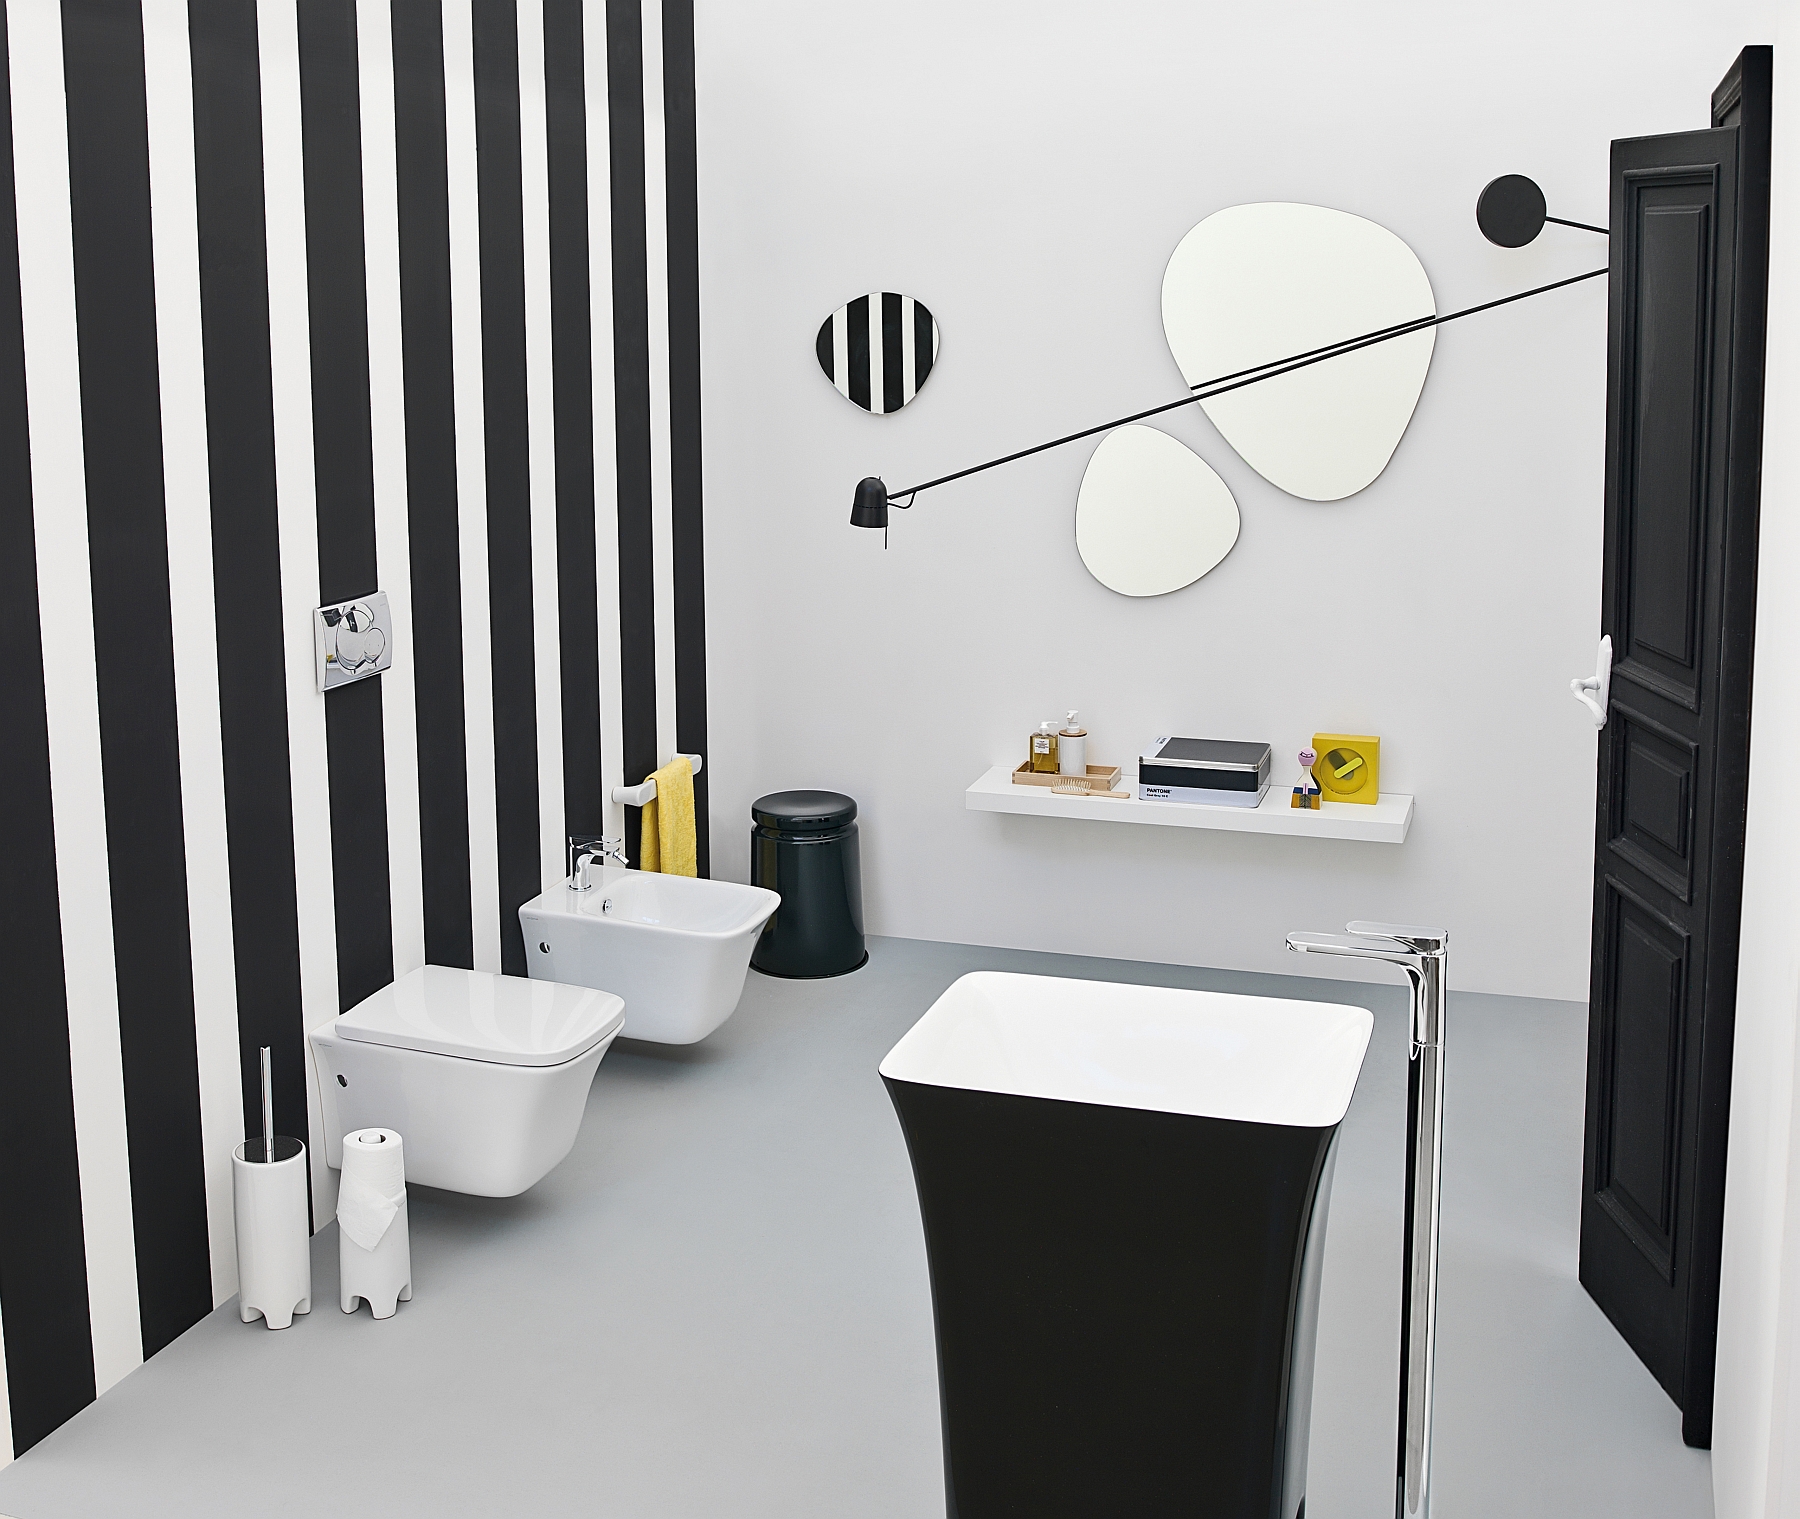 The Artceram Cow collection adds black magic to your art deco bathroom!